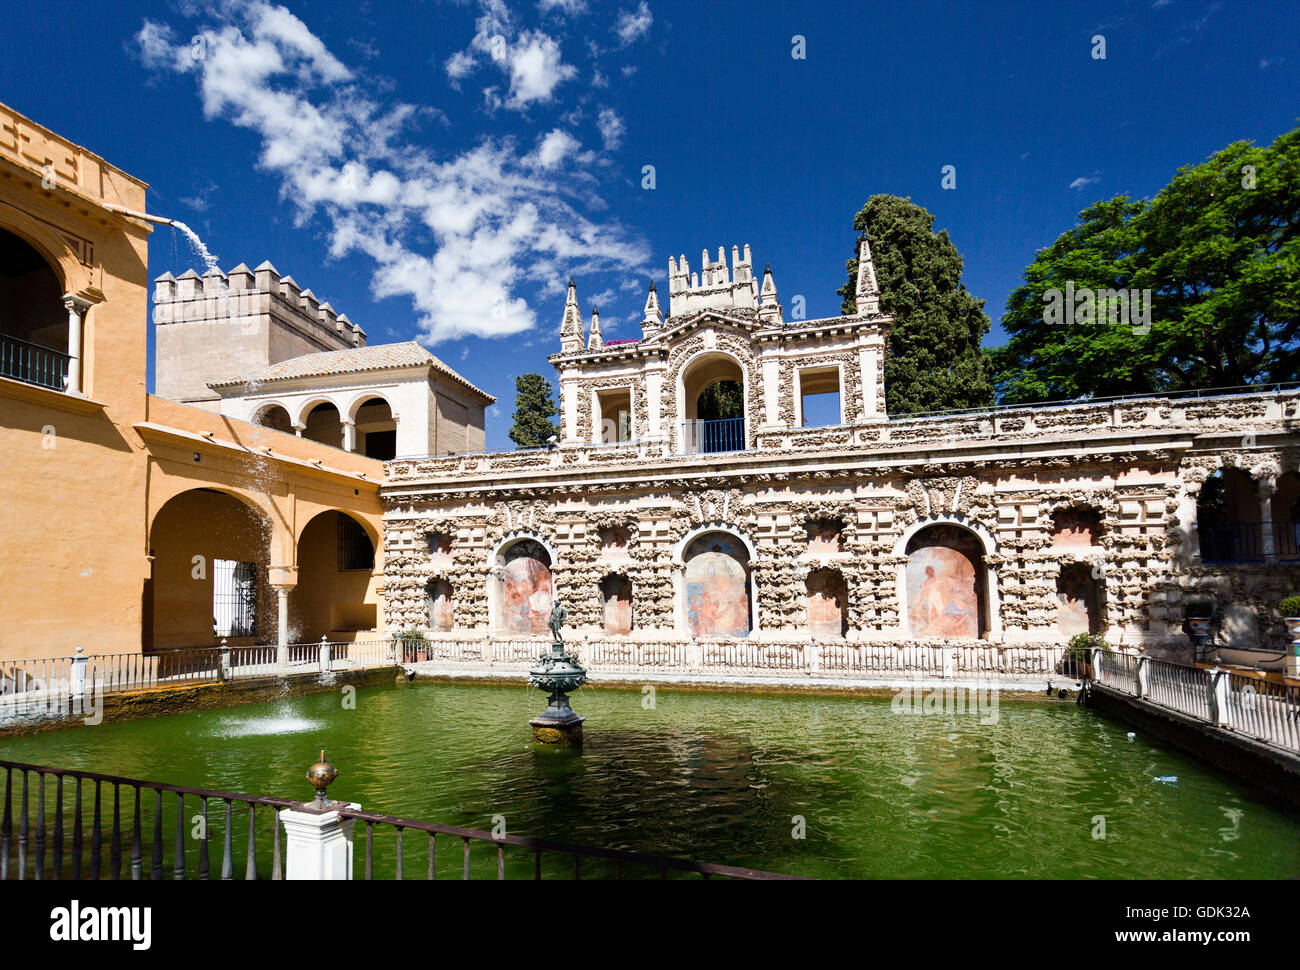 View of the pool and Grotto Gallery (Galeria de Grutesco) in the gardens of the Alcazar of Seville, Spain Stock Photo